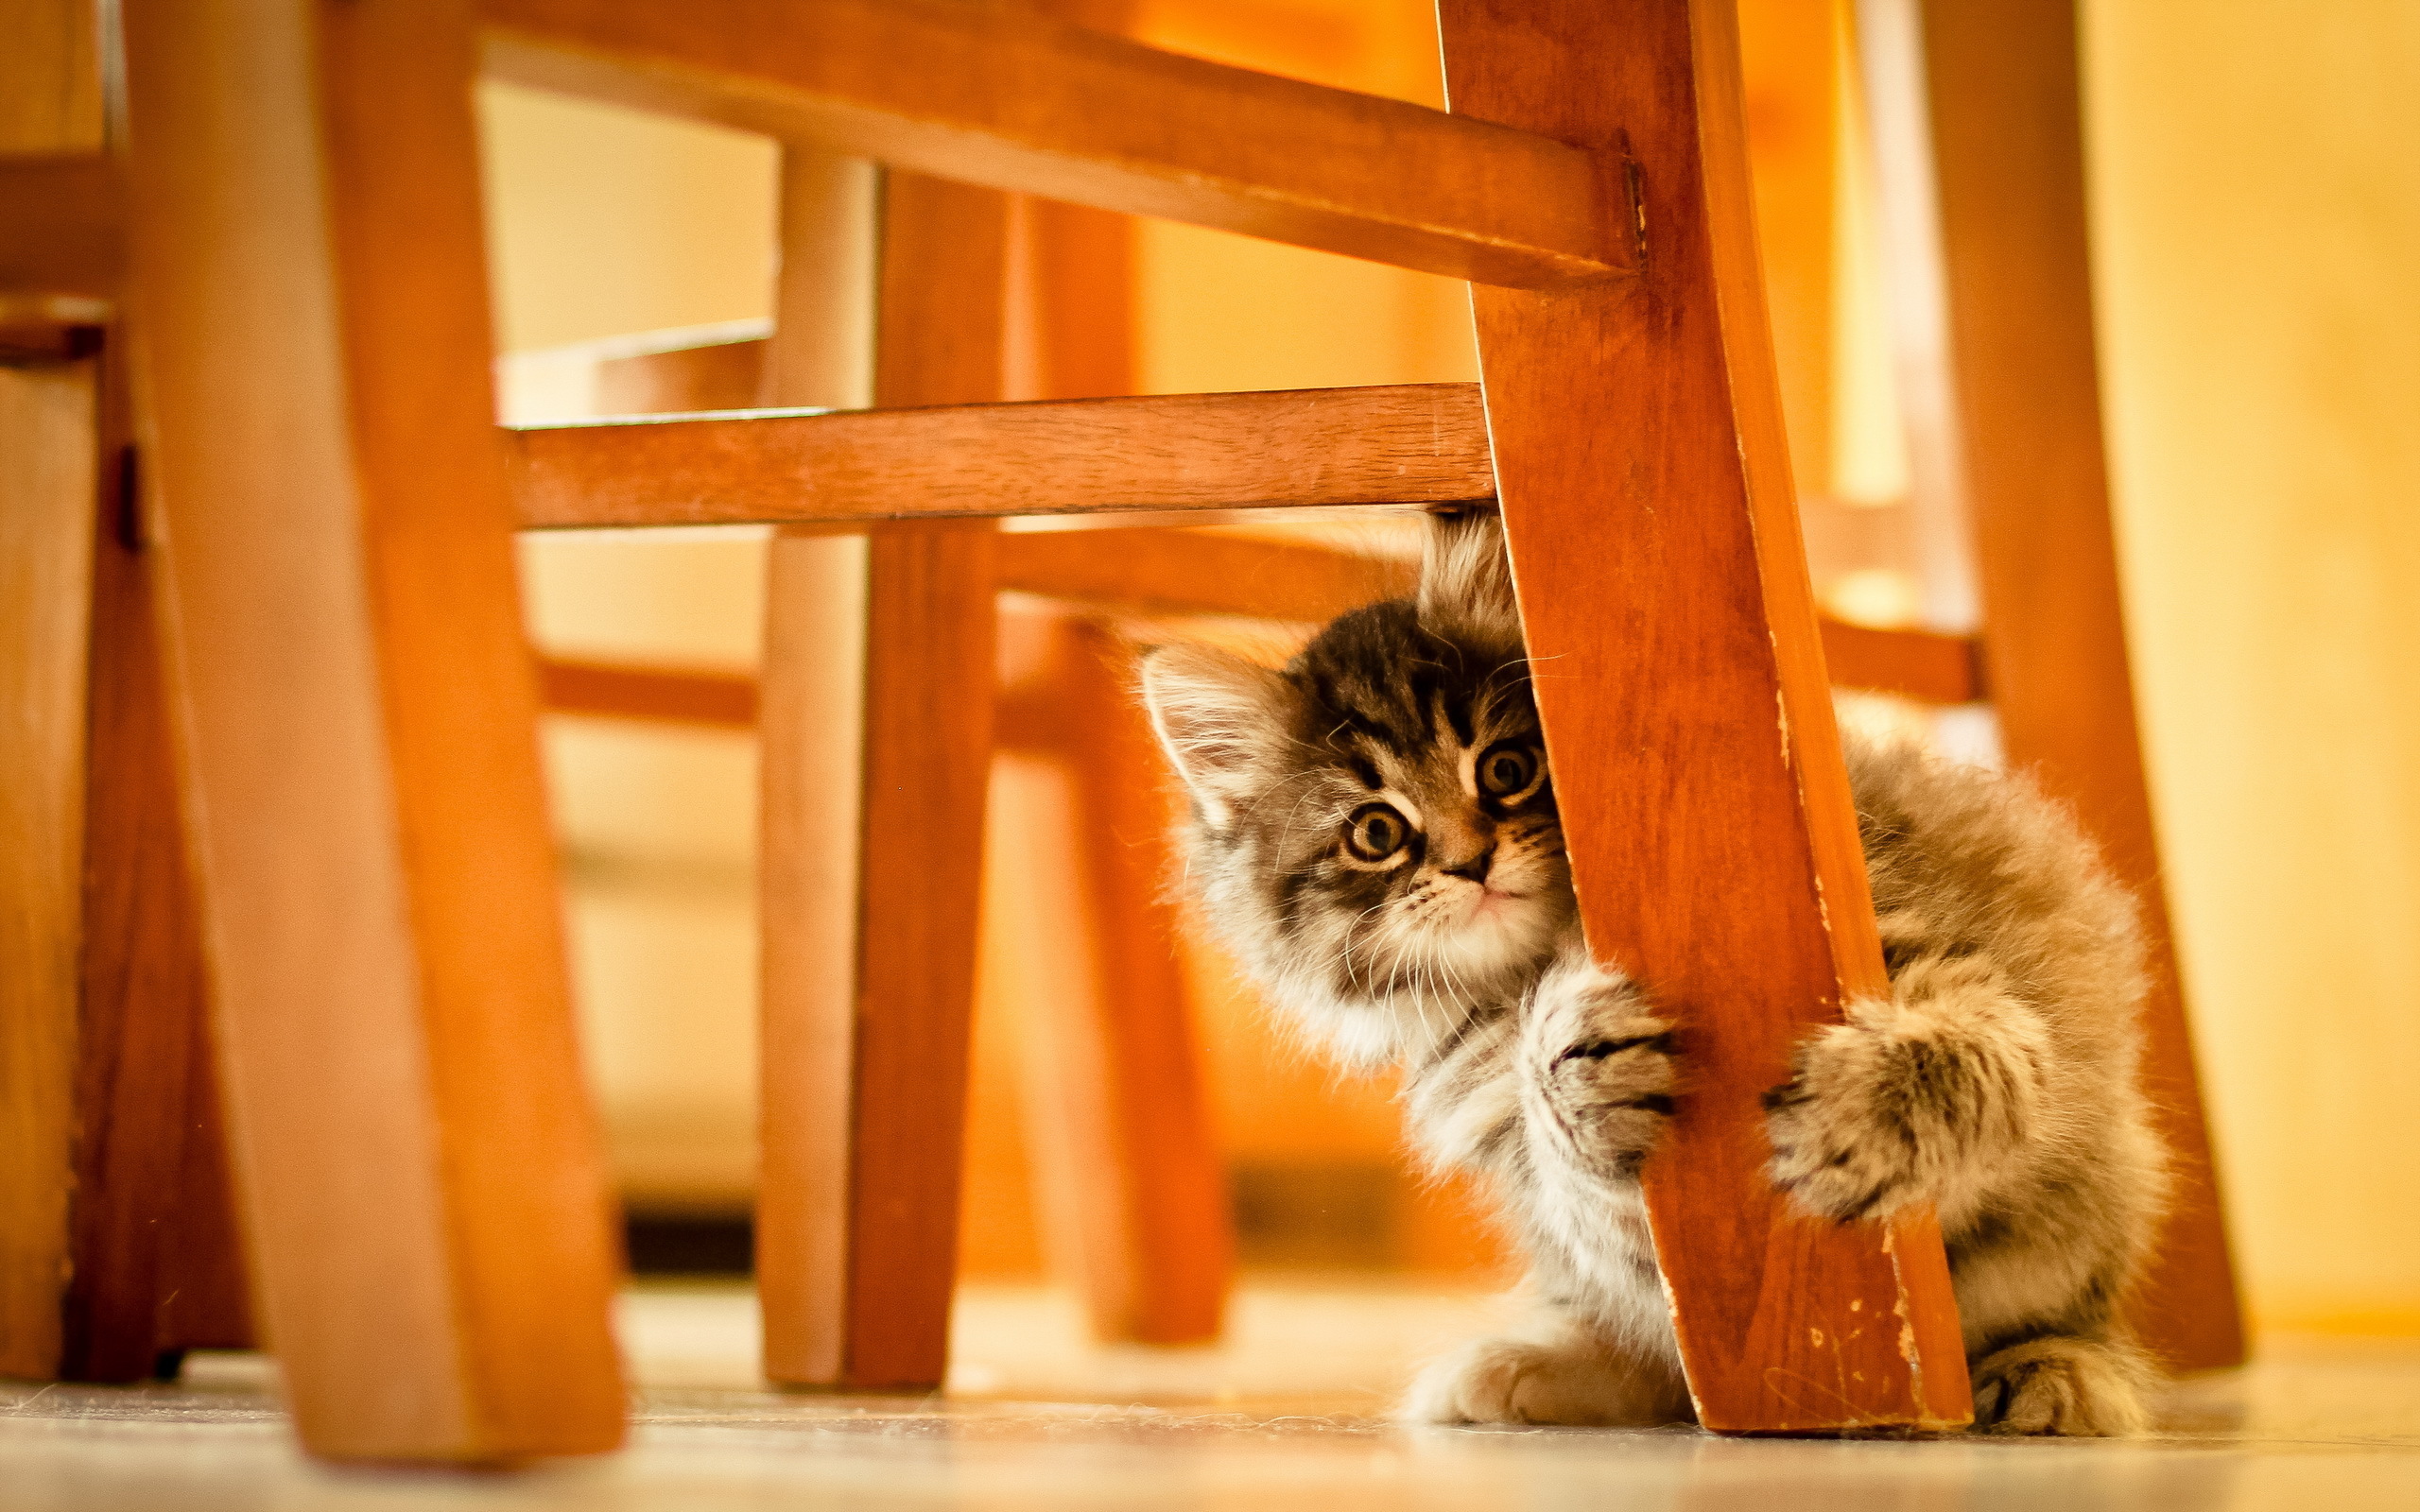 The kitten under the chair wallpapers and images ...